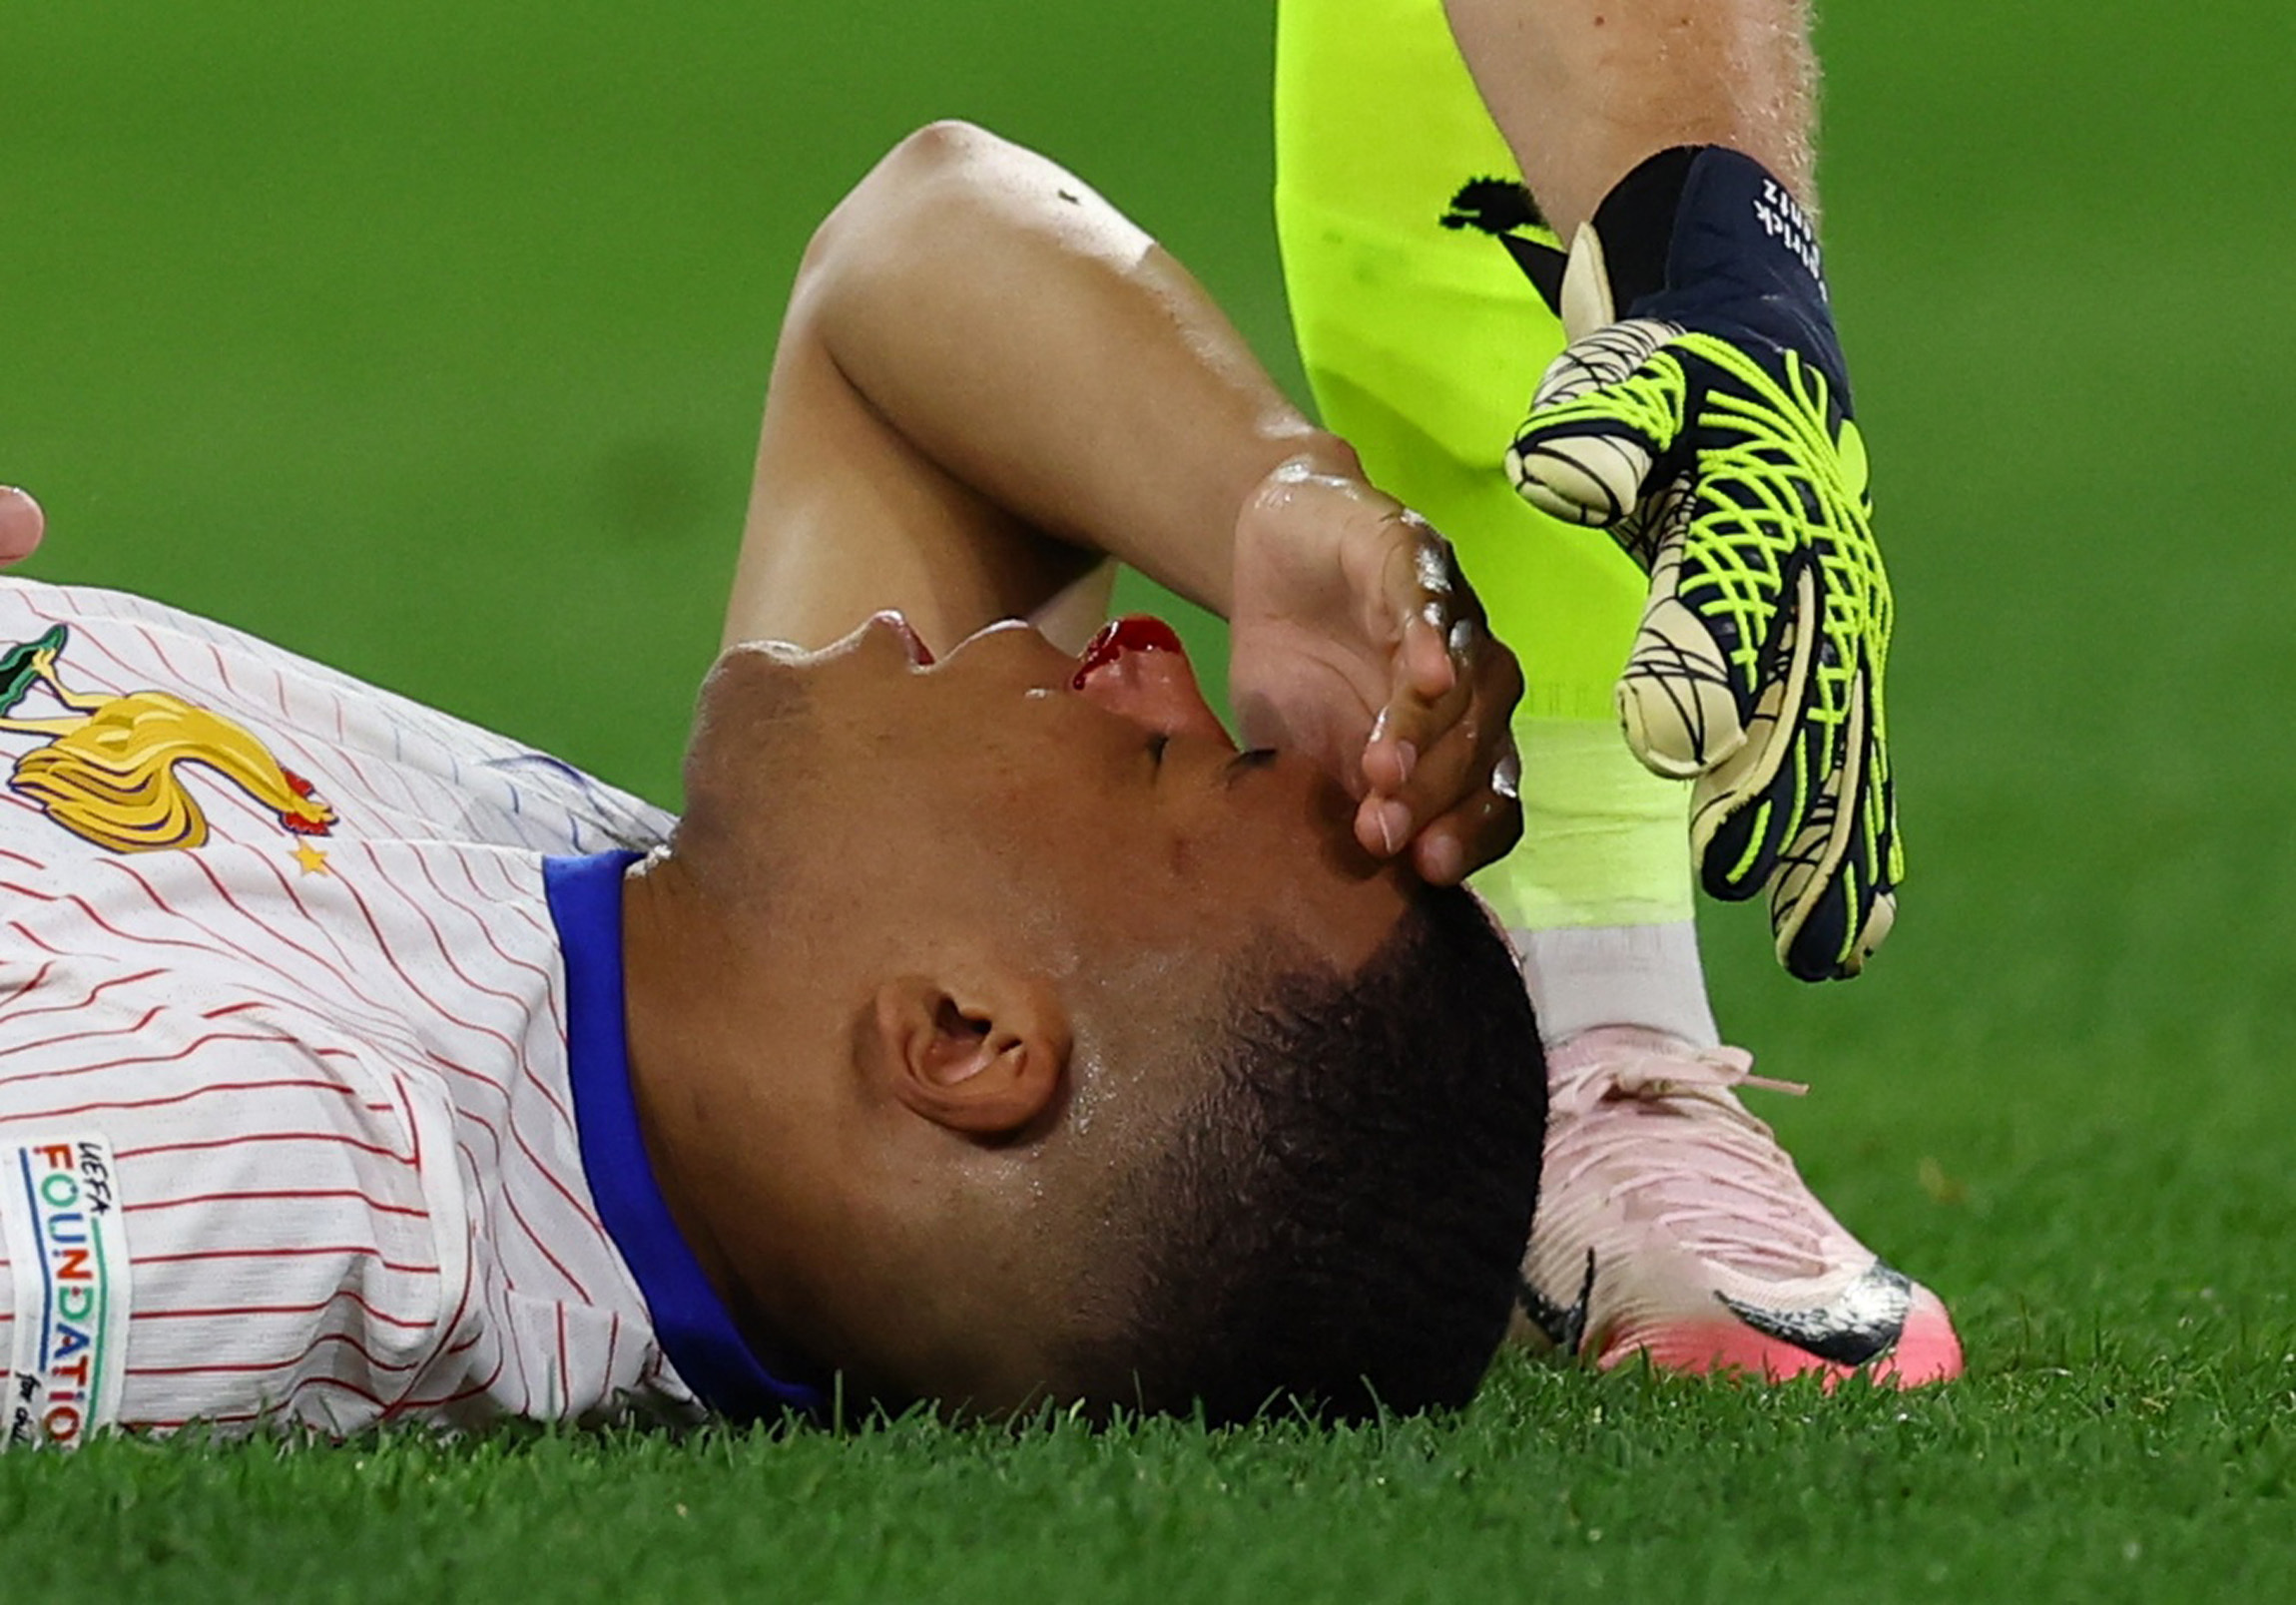 Kylian Mbappe was left covered in blood after a clash on the pitch against Austria